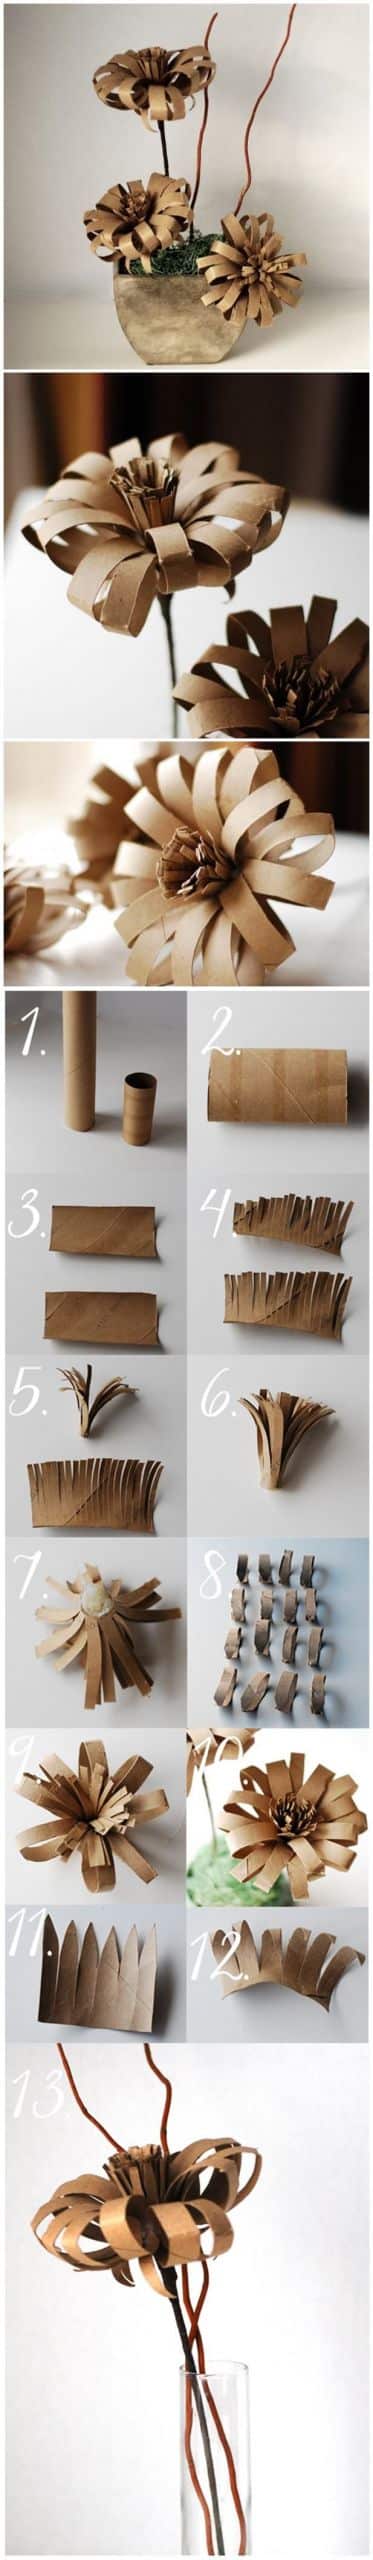 Crafts toilet paper rolls scaled